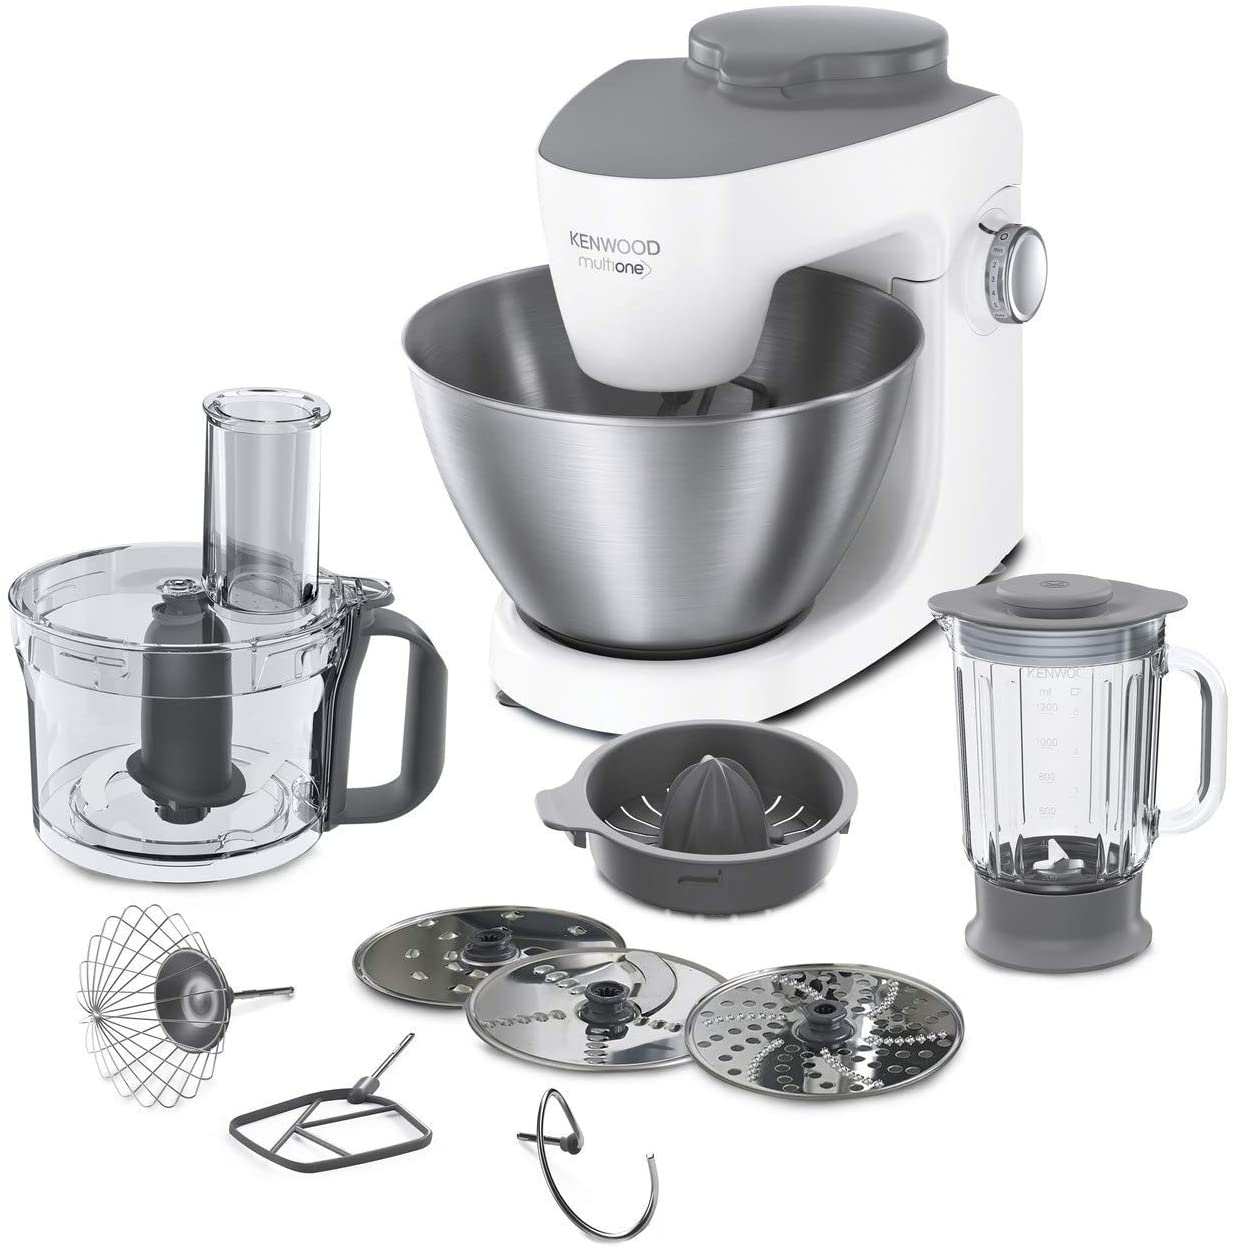 Kenwood MultiOne KHH321 WH Food Processor | 1000 Watt Power | 4.3 L Mixing Bowl | Variable Speed Control | Includes 3 Mixing Elements | Separate Juicer and Mixing Attachment for Smoothies